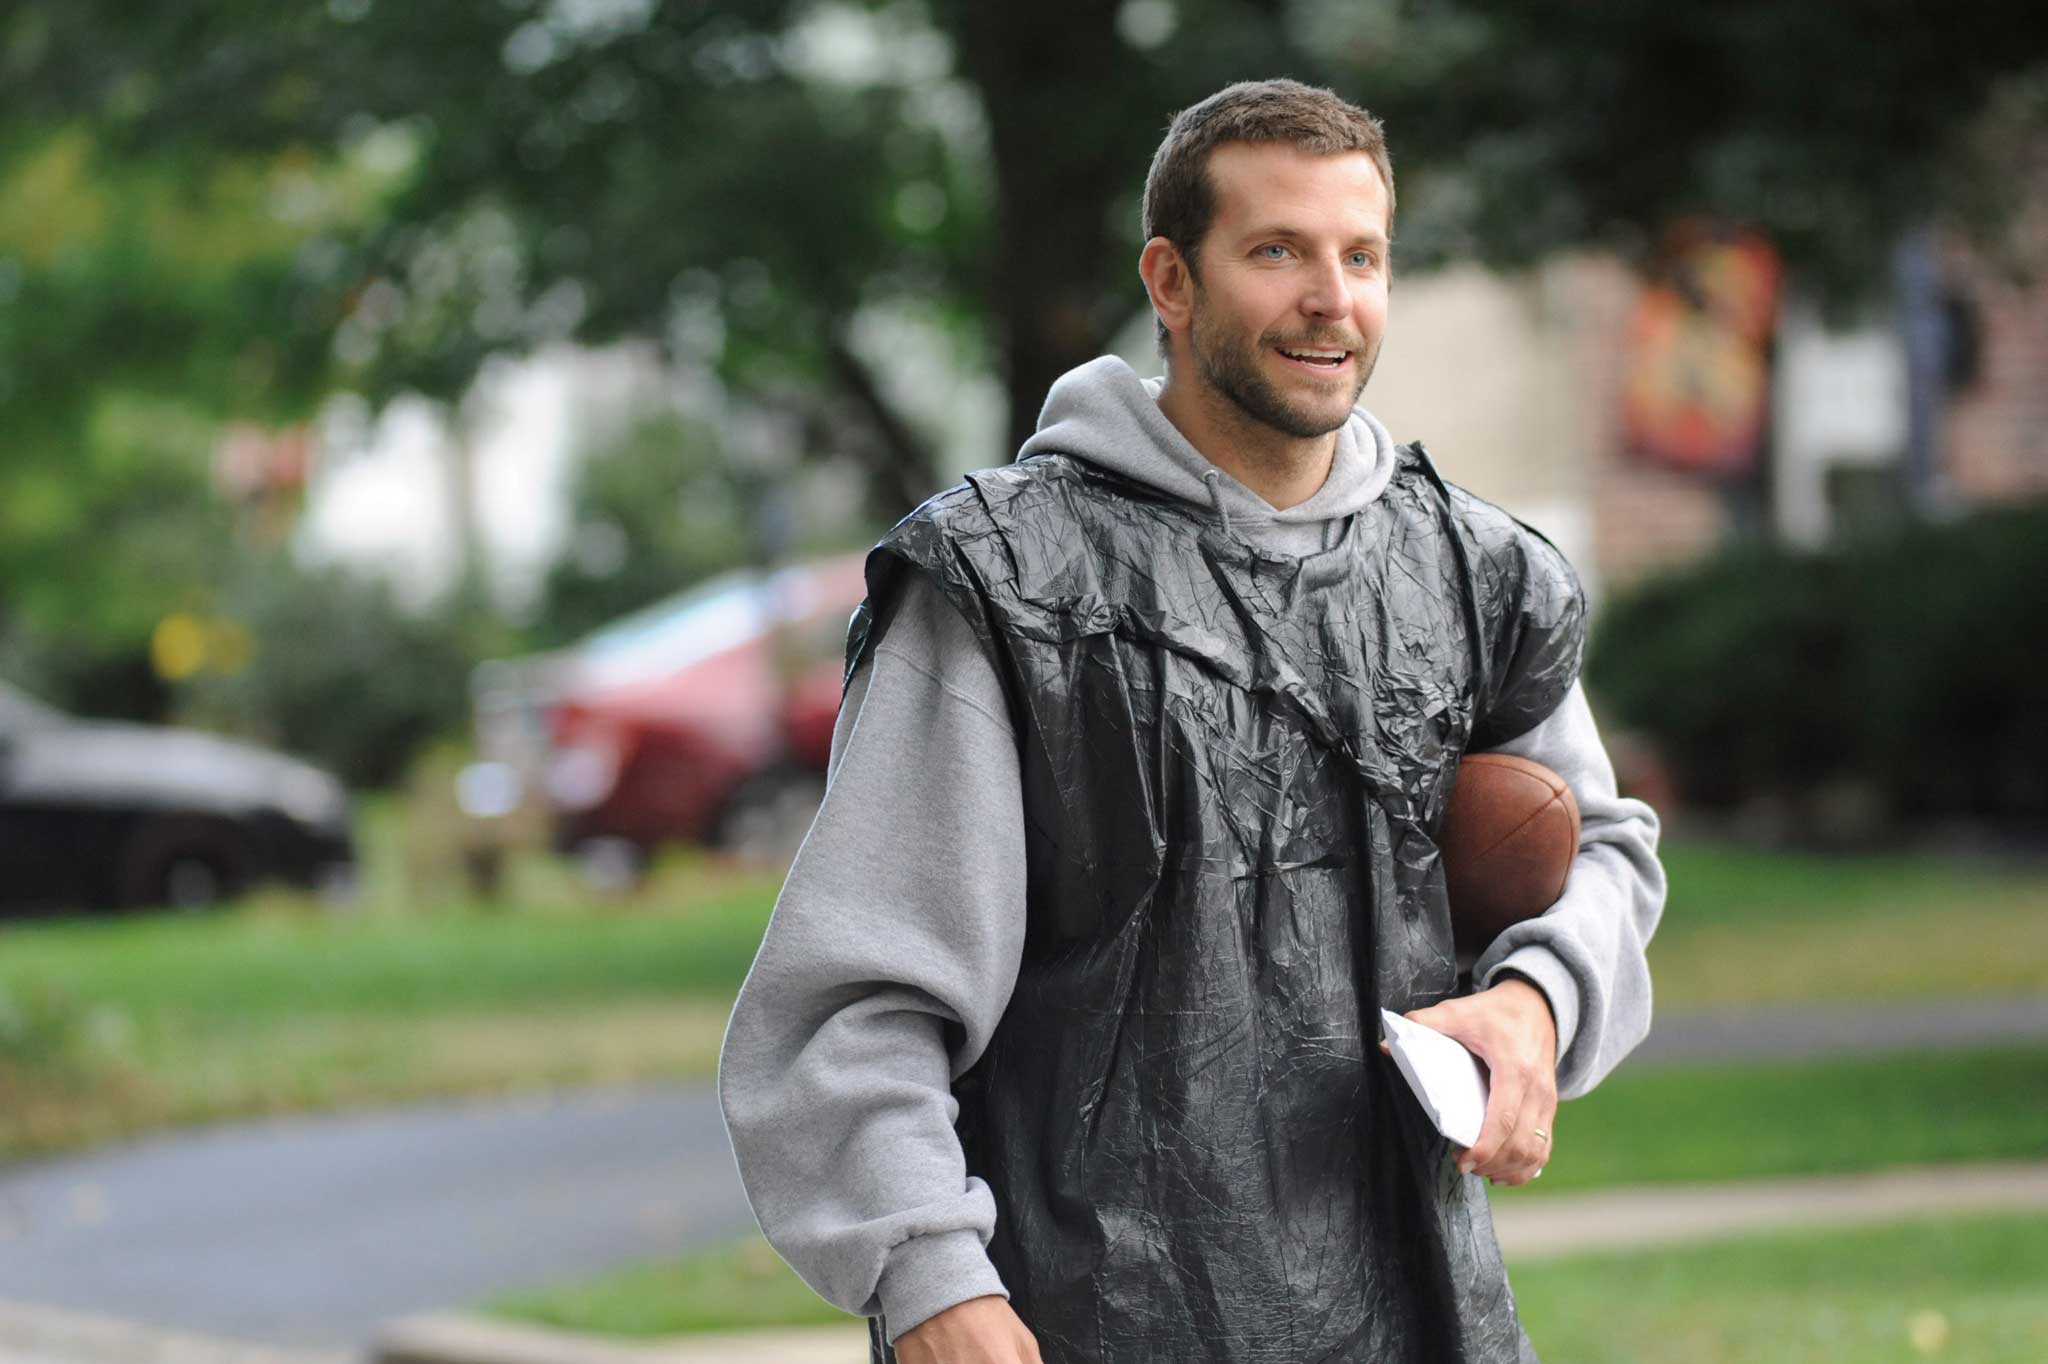 Well-played: Bradley Cooper in 'Silver Linings Playbook'